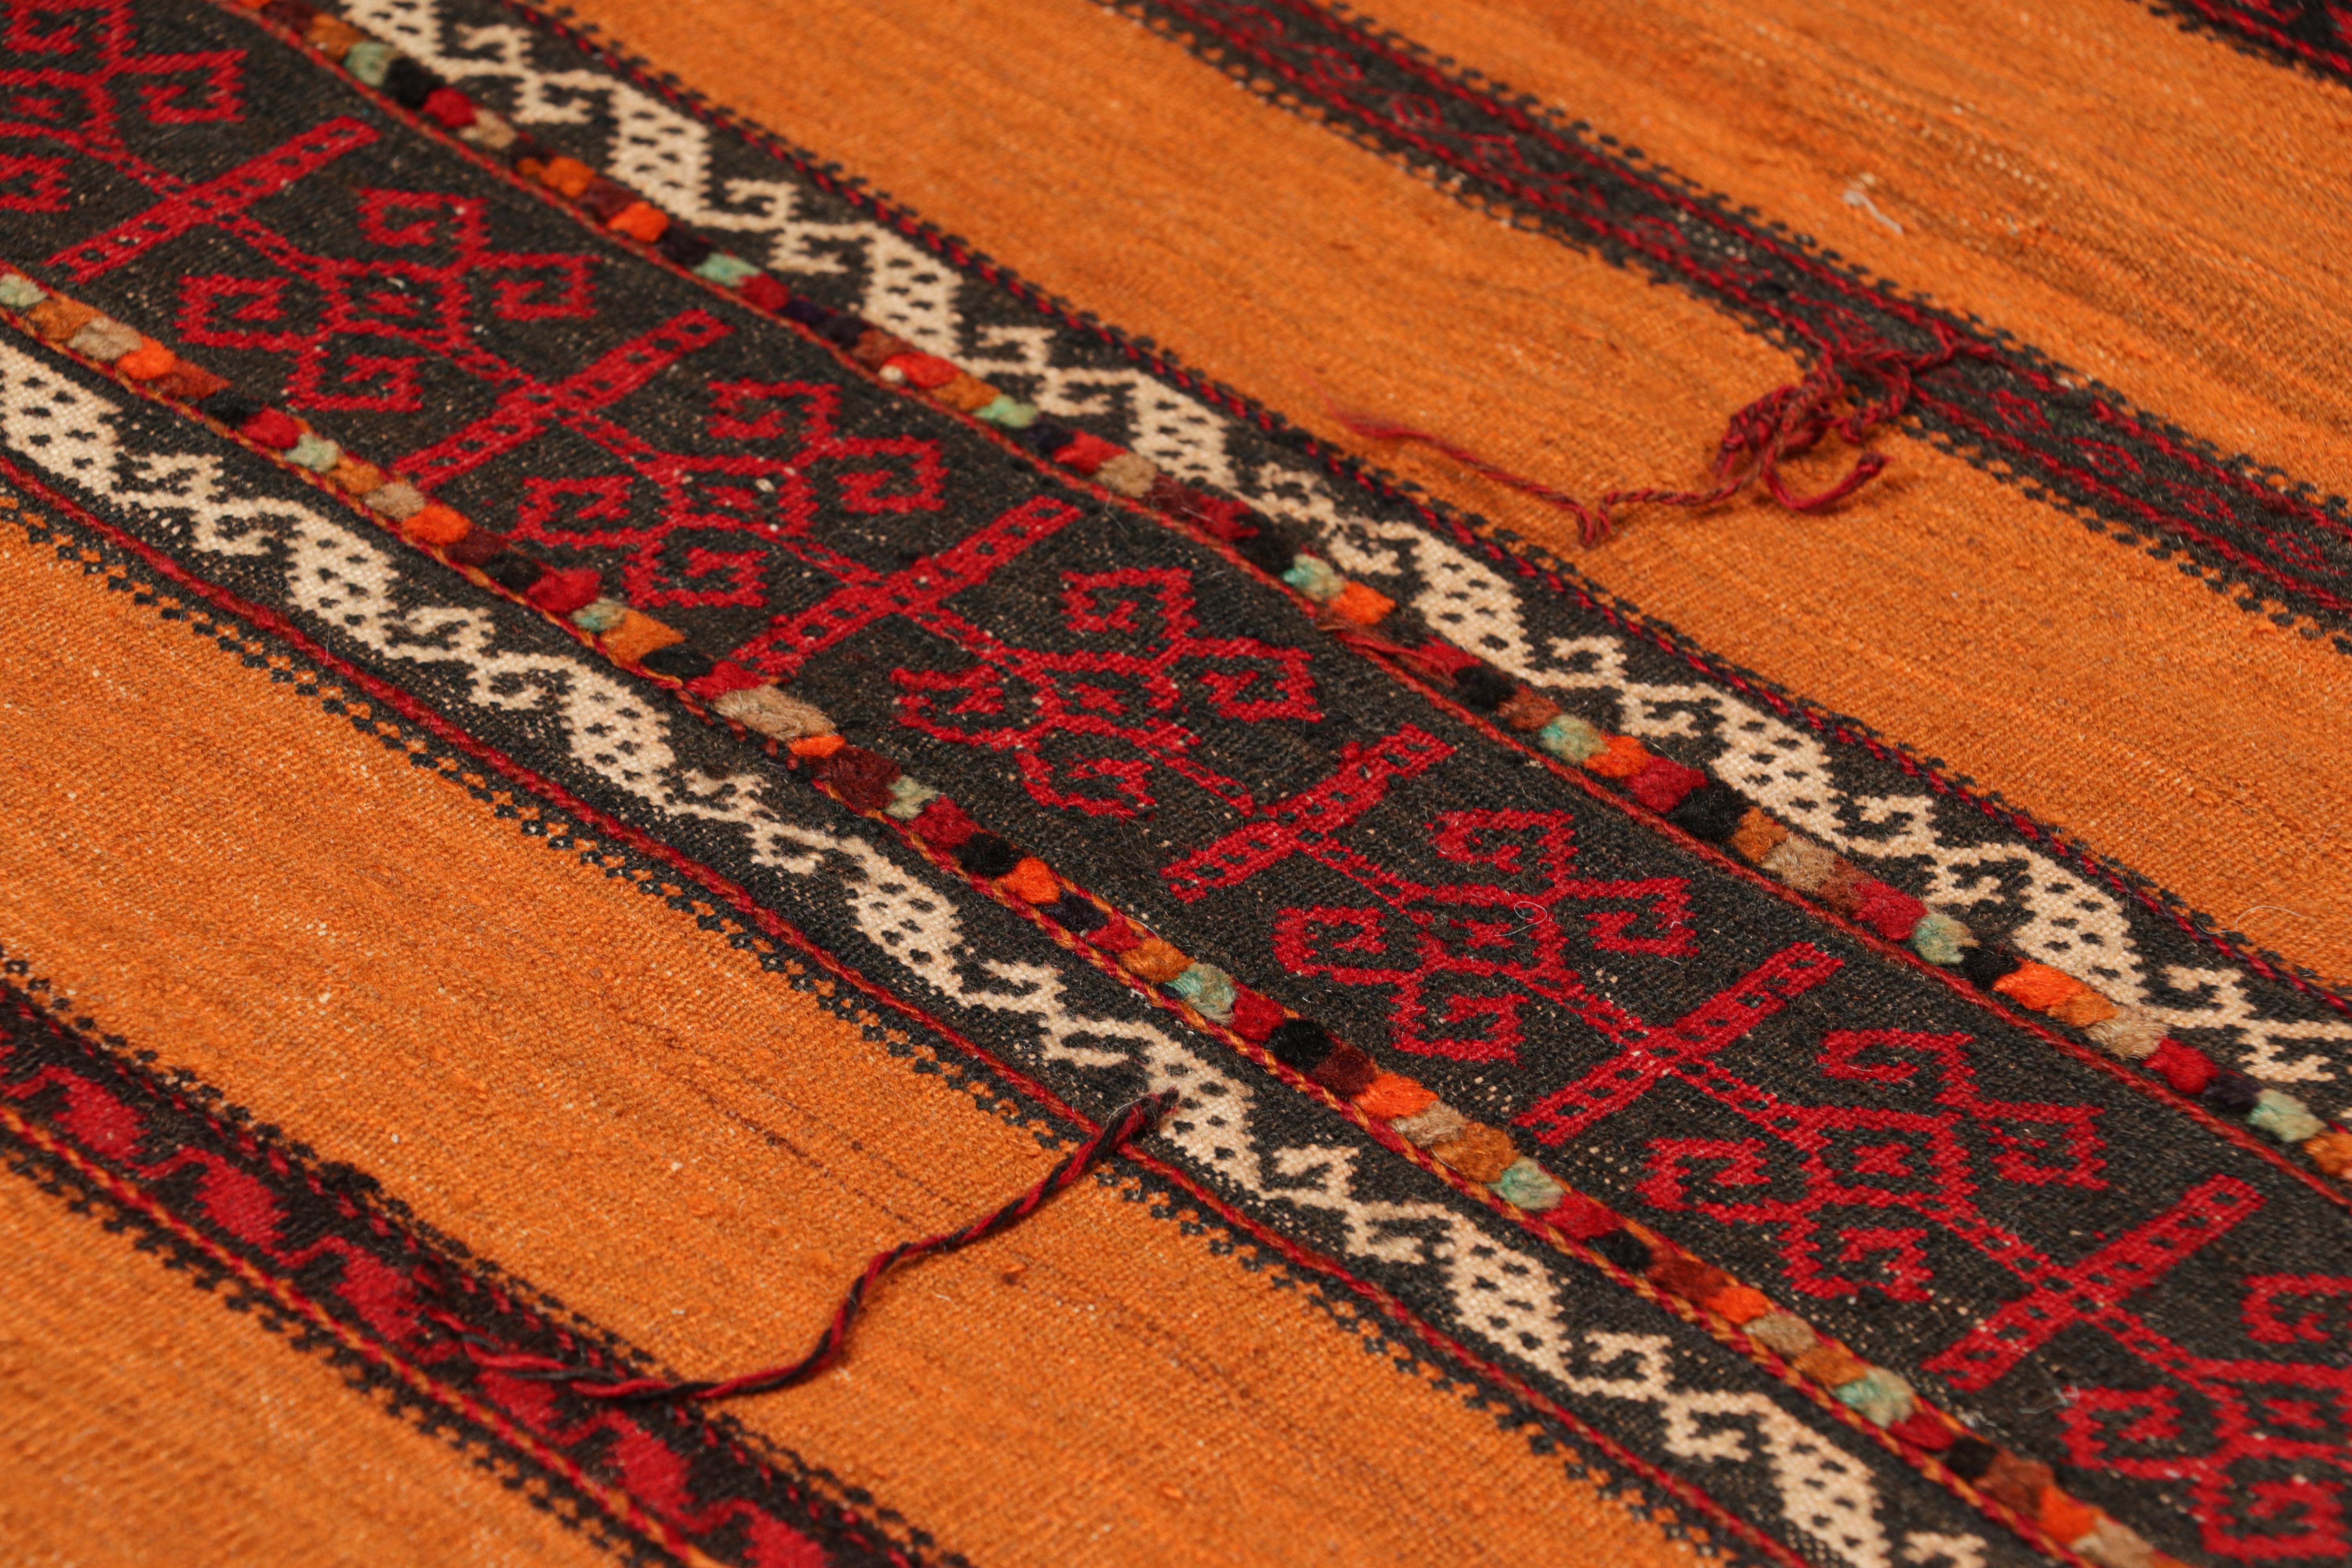 Handwoven in wool, circa 1950-1960, this 2x5 vintage Afghan tribal kilim, is a collectible tribal piece that may have been used as table covers in nomadic daily life, much similar to Persian Sofreh Kilims.

On the Design: 

Drawing on Afghan tribal